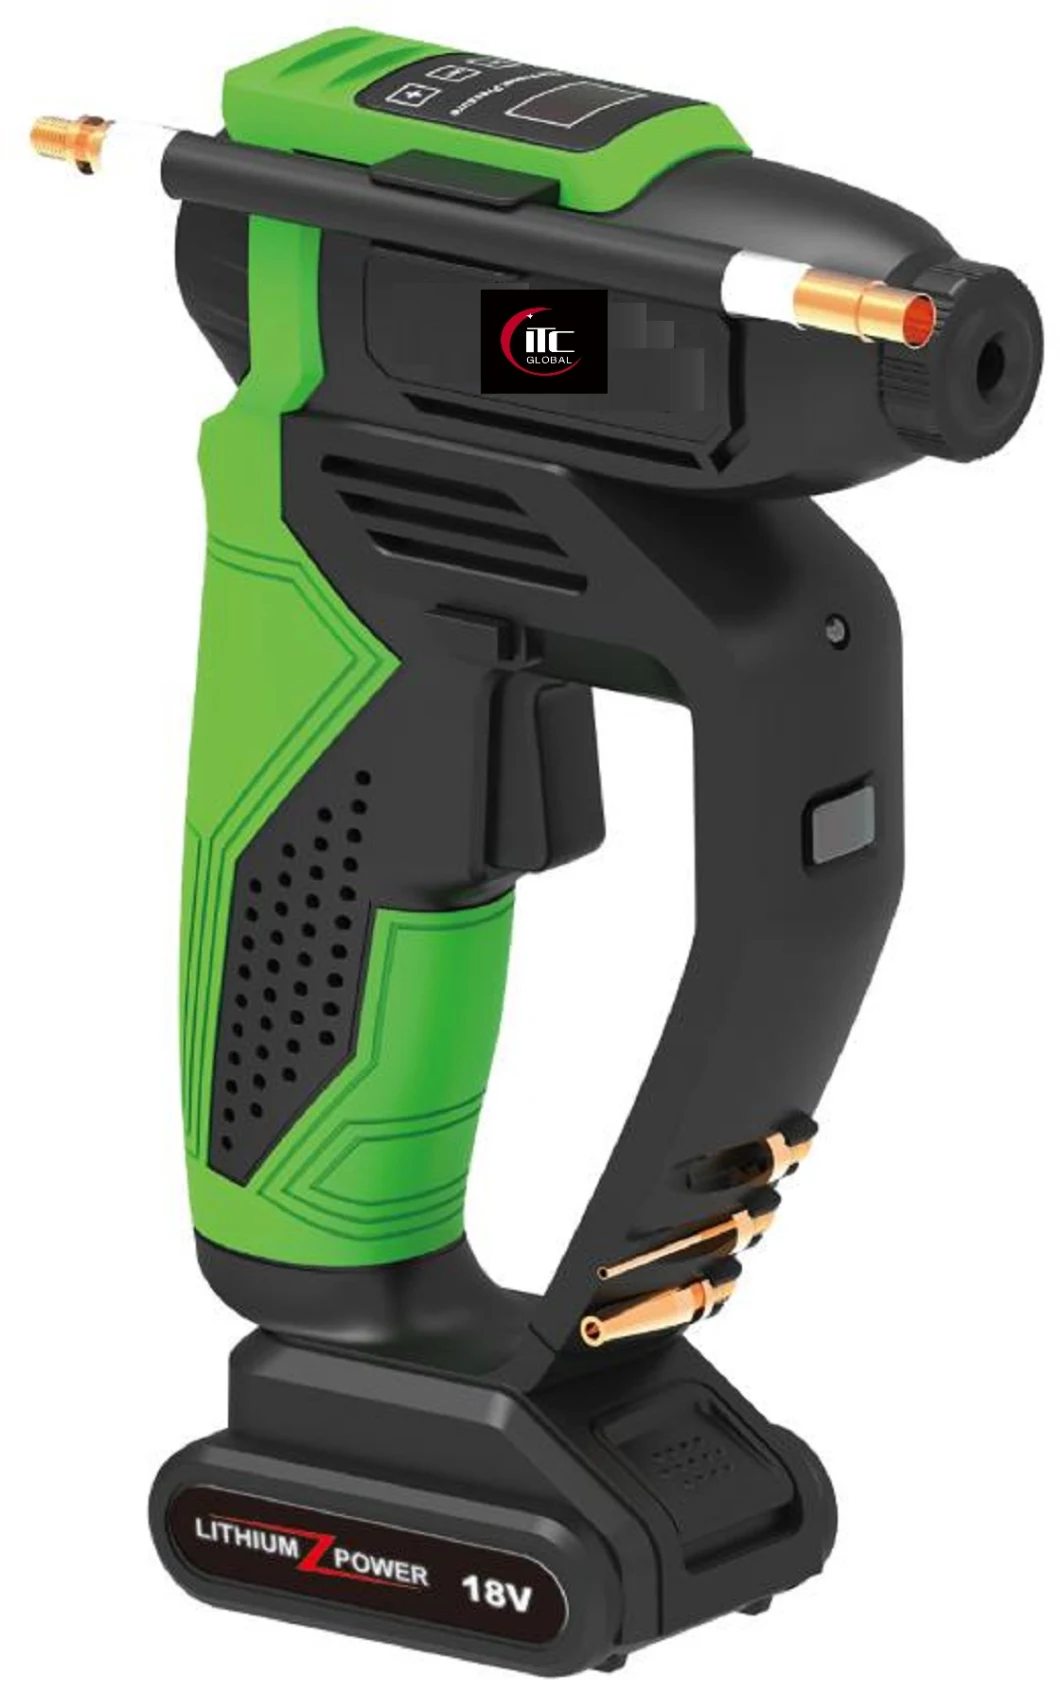 Greenline Powerful Lithium-Ion Battery Cordless/Electric Impact Drill/Screwdriver-Power Machine Tools